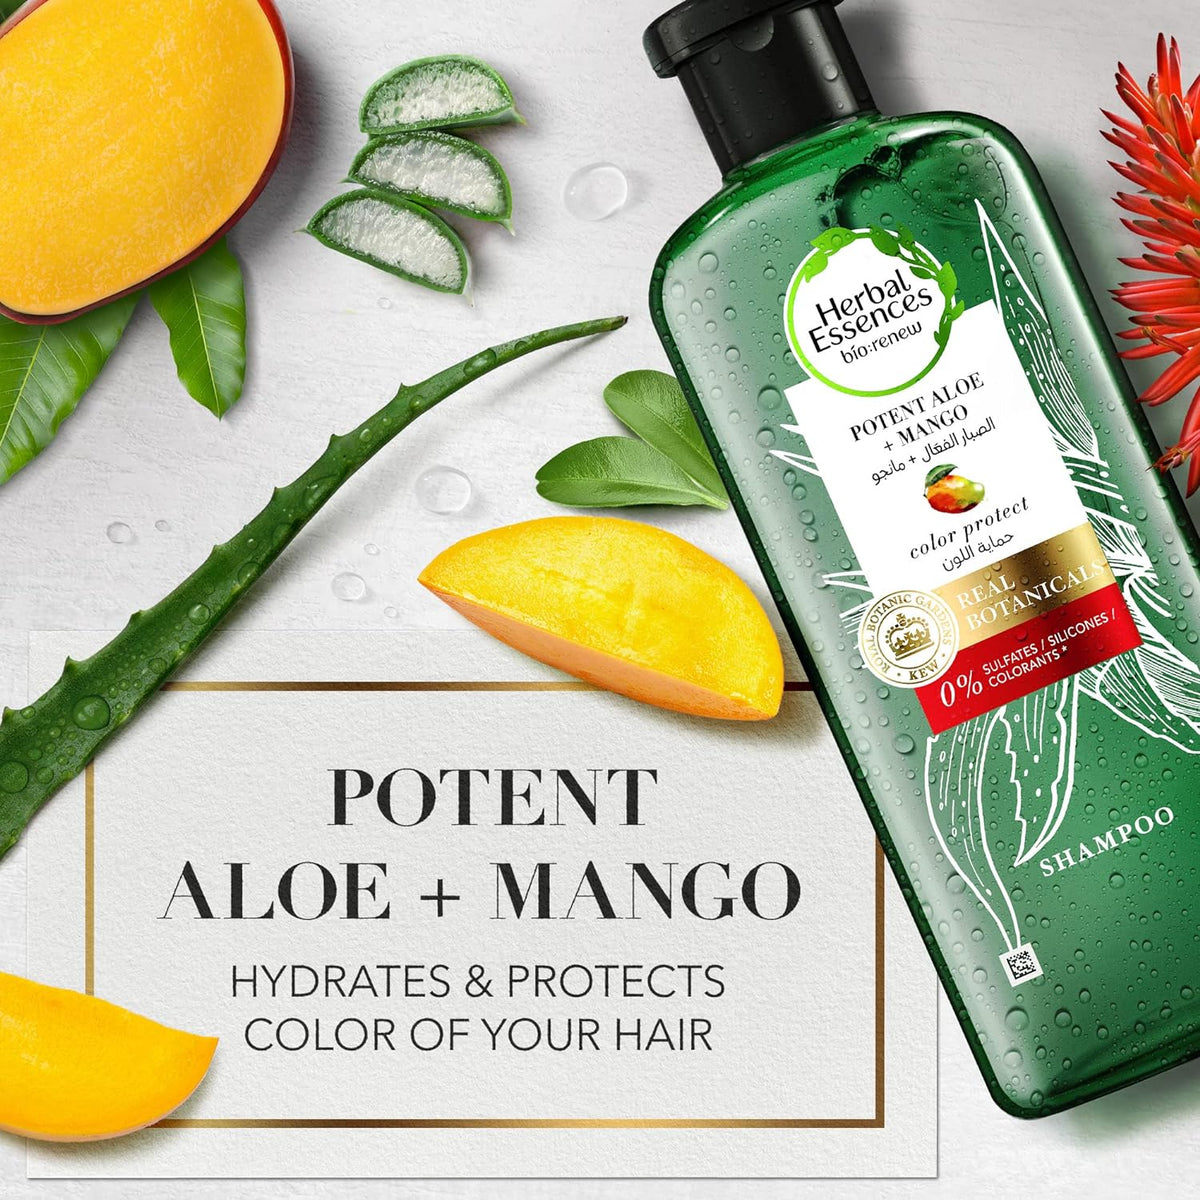 Herbal Essences Color Protect Sulfate Free Potent Aloe Vera With Mango Natural Sham